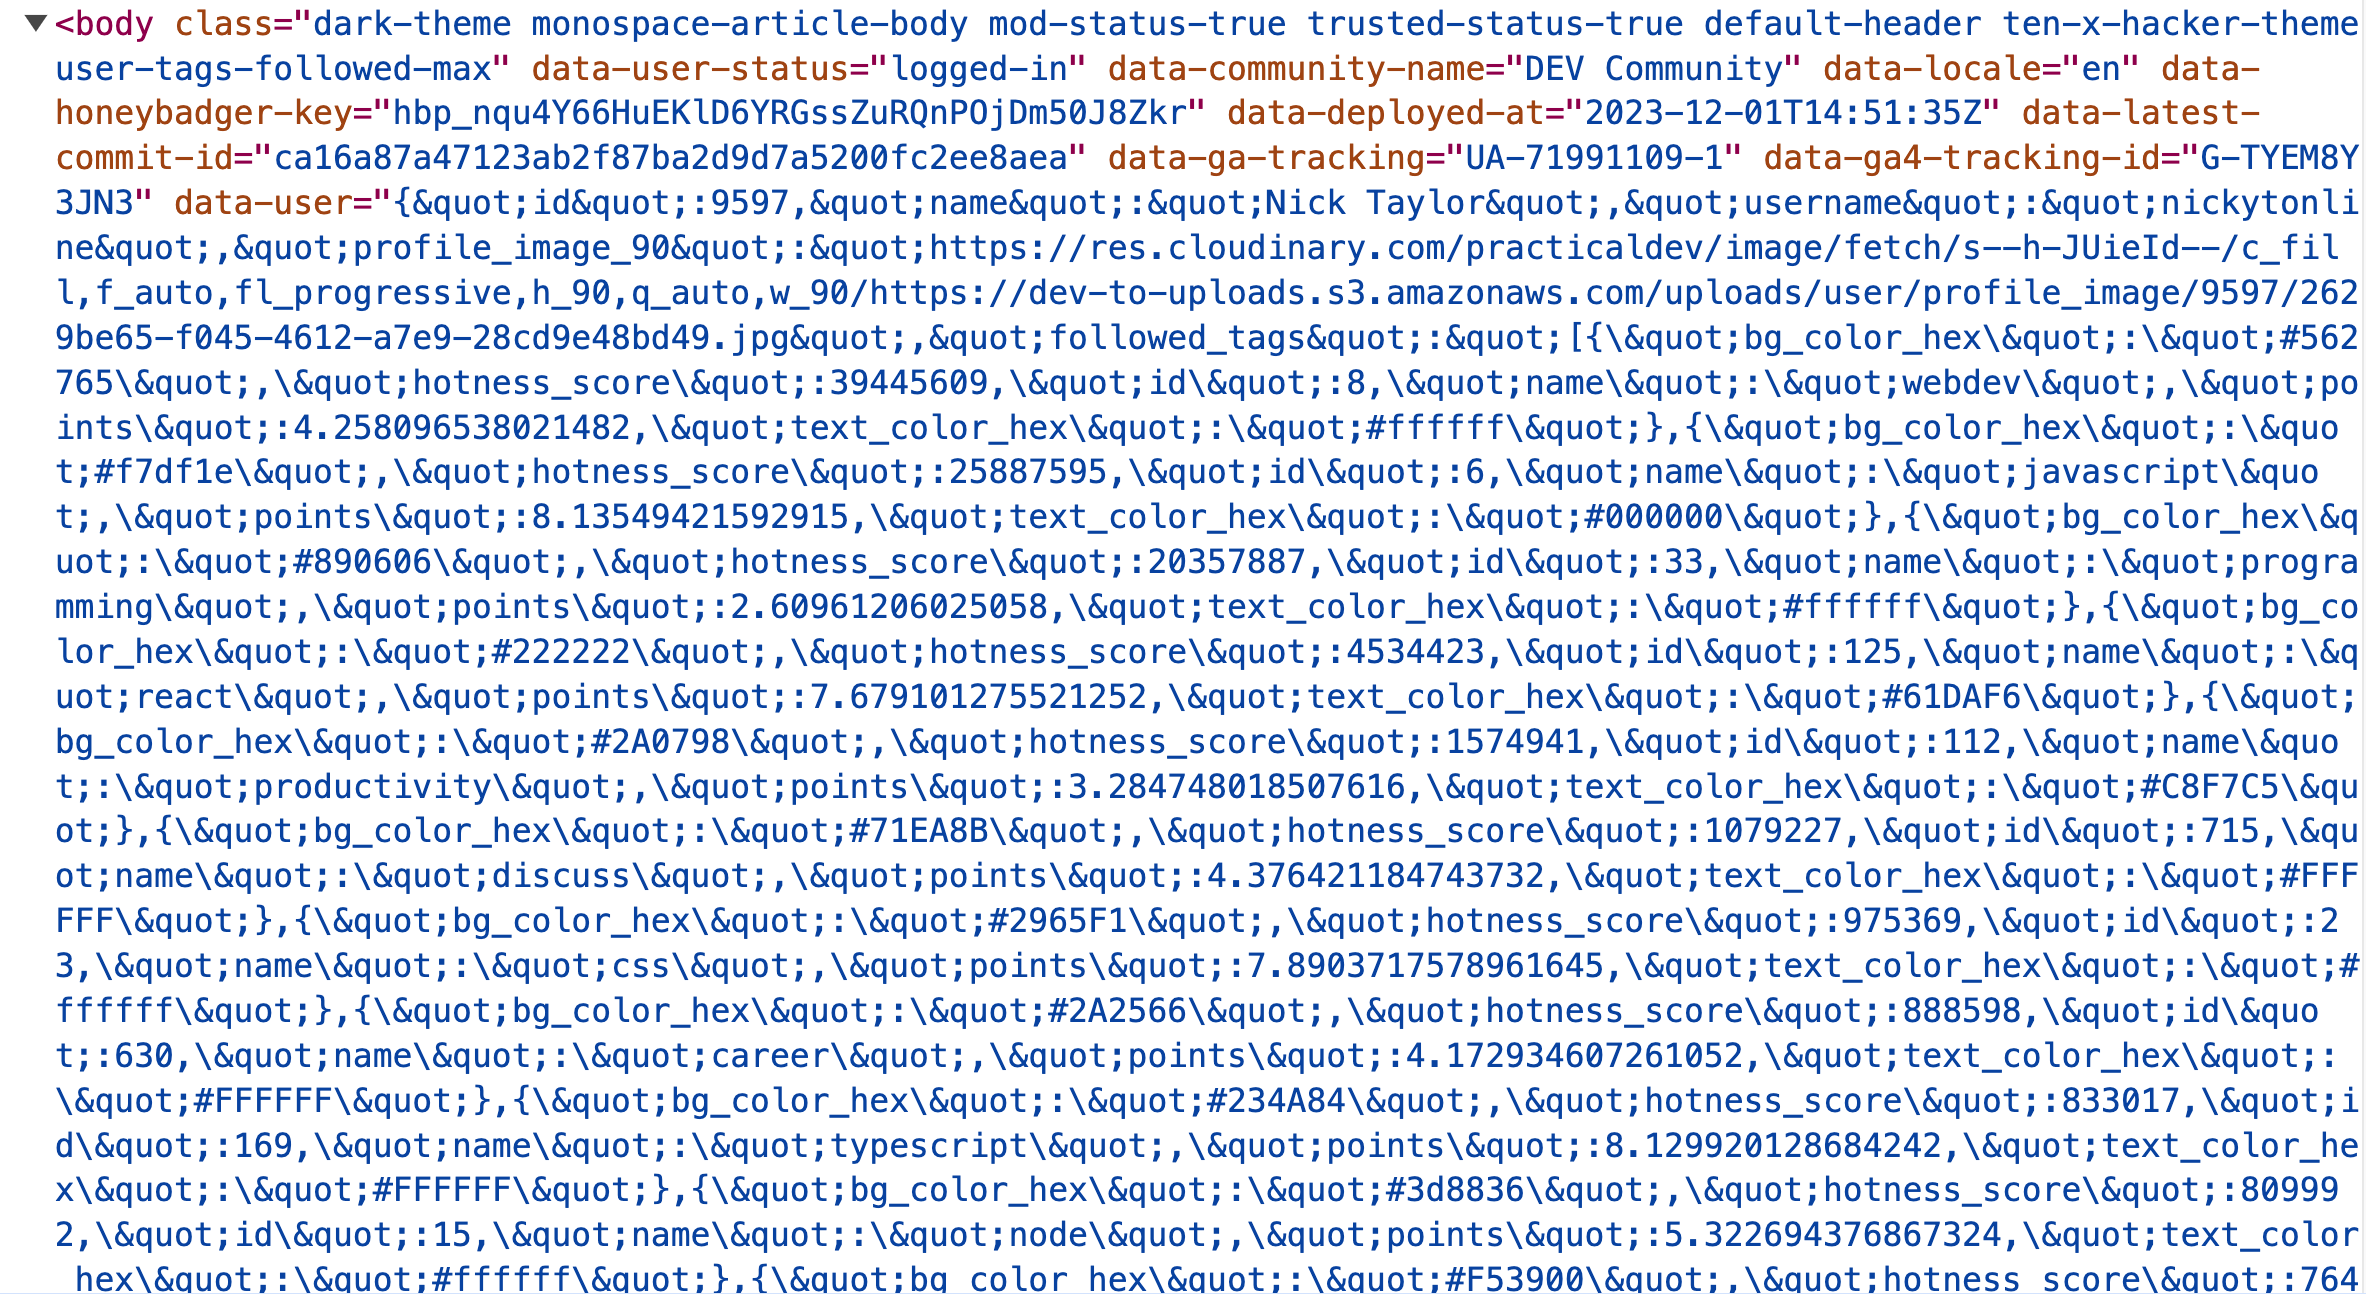 some of the markup from the dev.to homepage showing data attributes in use on DEV